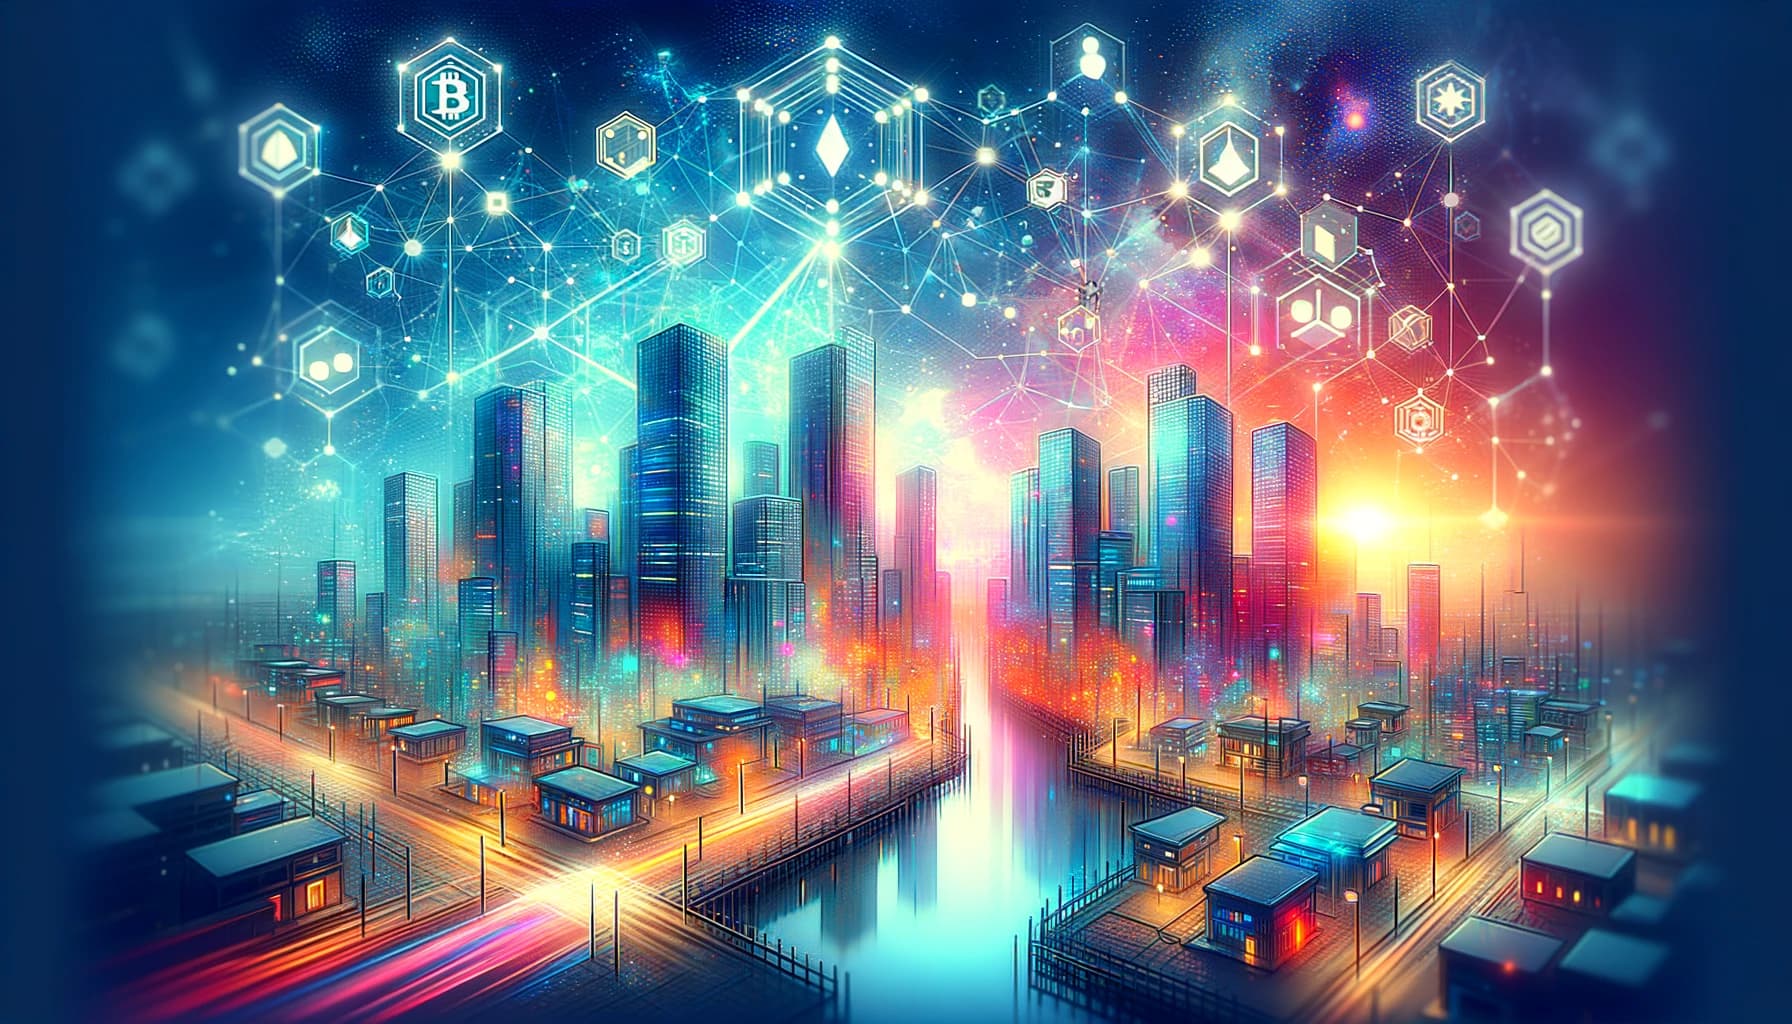 Bucket Technologies image showing a well-lit downtown portion of a city with bitcoin logos floating in the night sky above.